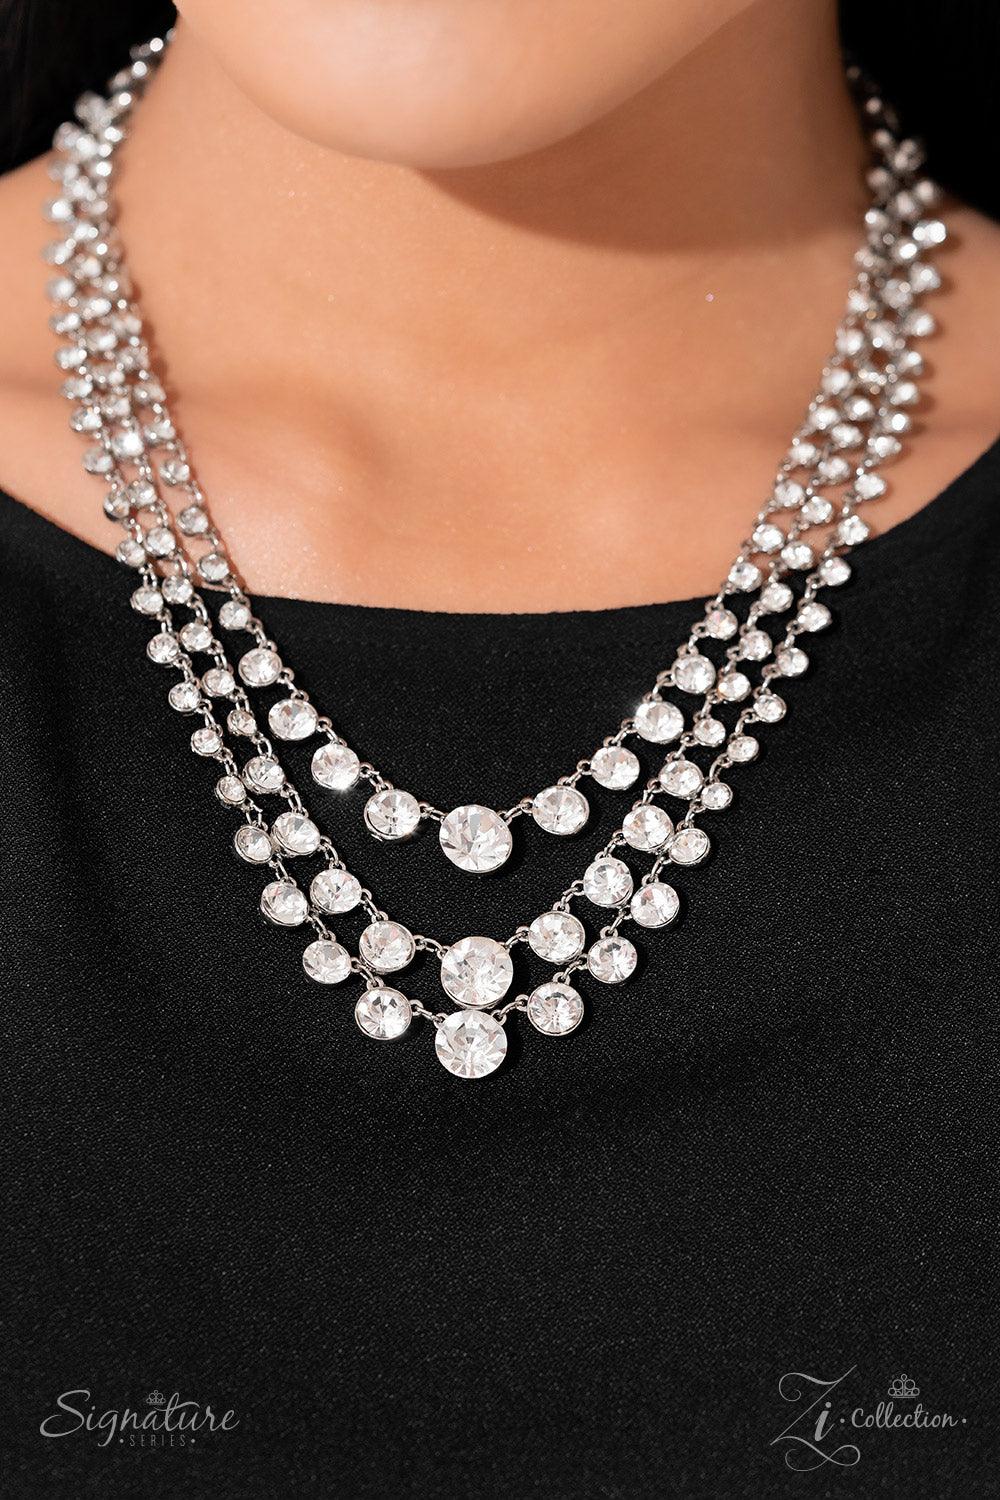 Paparazzi Accessories - The Dana - 2023 Signature Zi Collection Necklace - Bling by JessieK